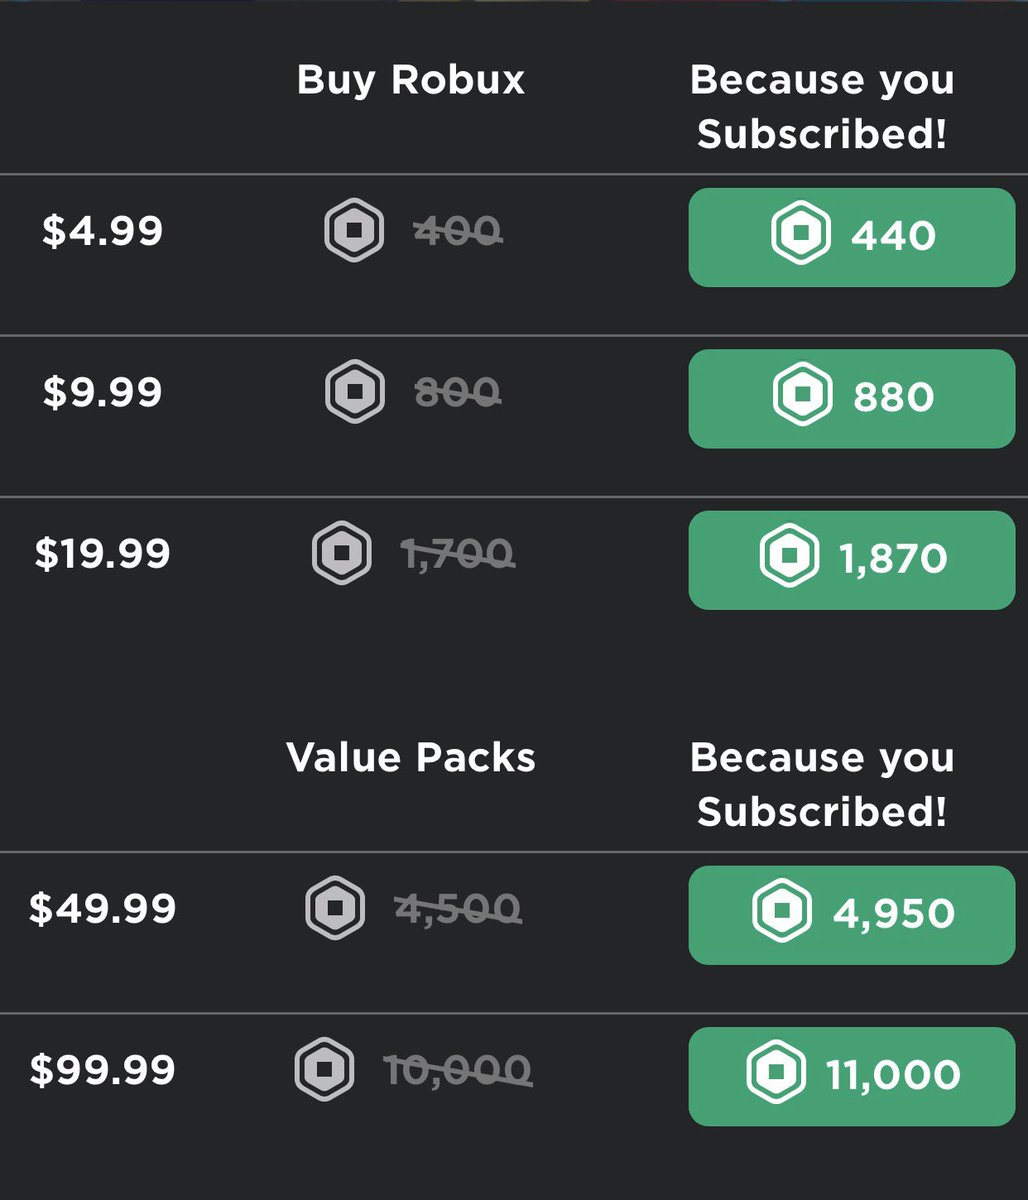 Alex P X On Twitter Roblox Has Slashed Their Robux Prices To The Point Where It S Not Even Worth It To Buy Robux Anymore If You Just Open Your Eyes And See